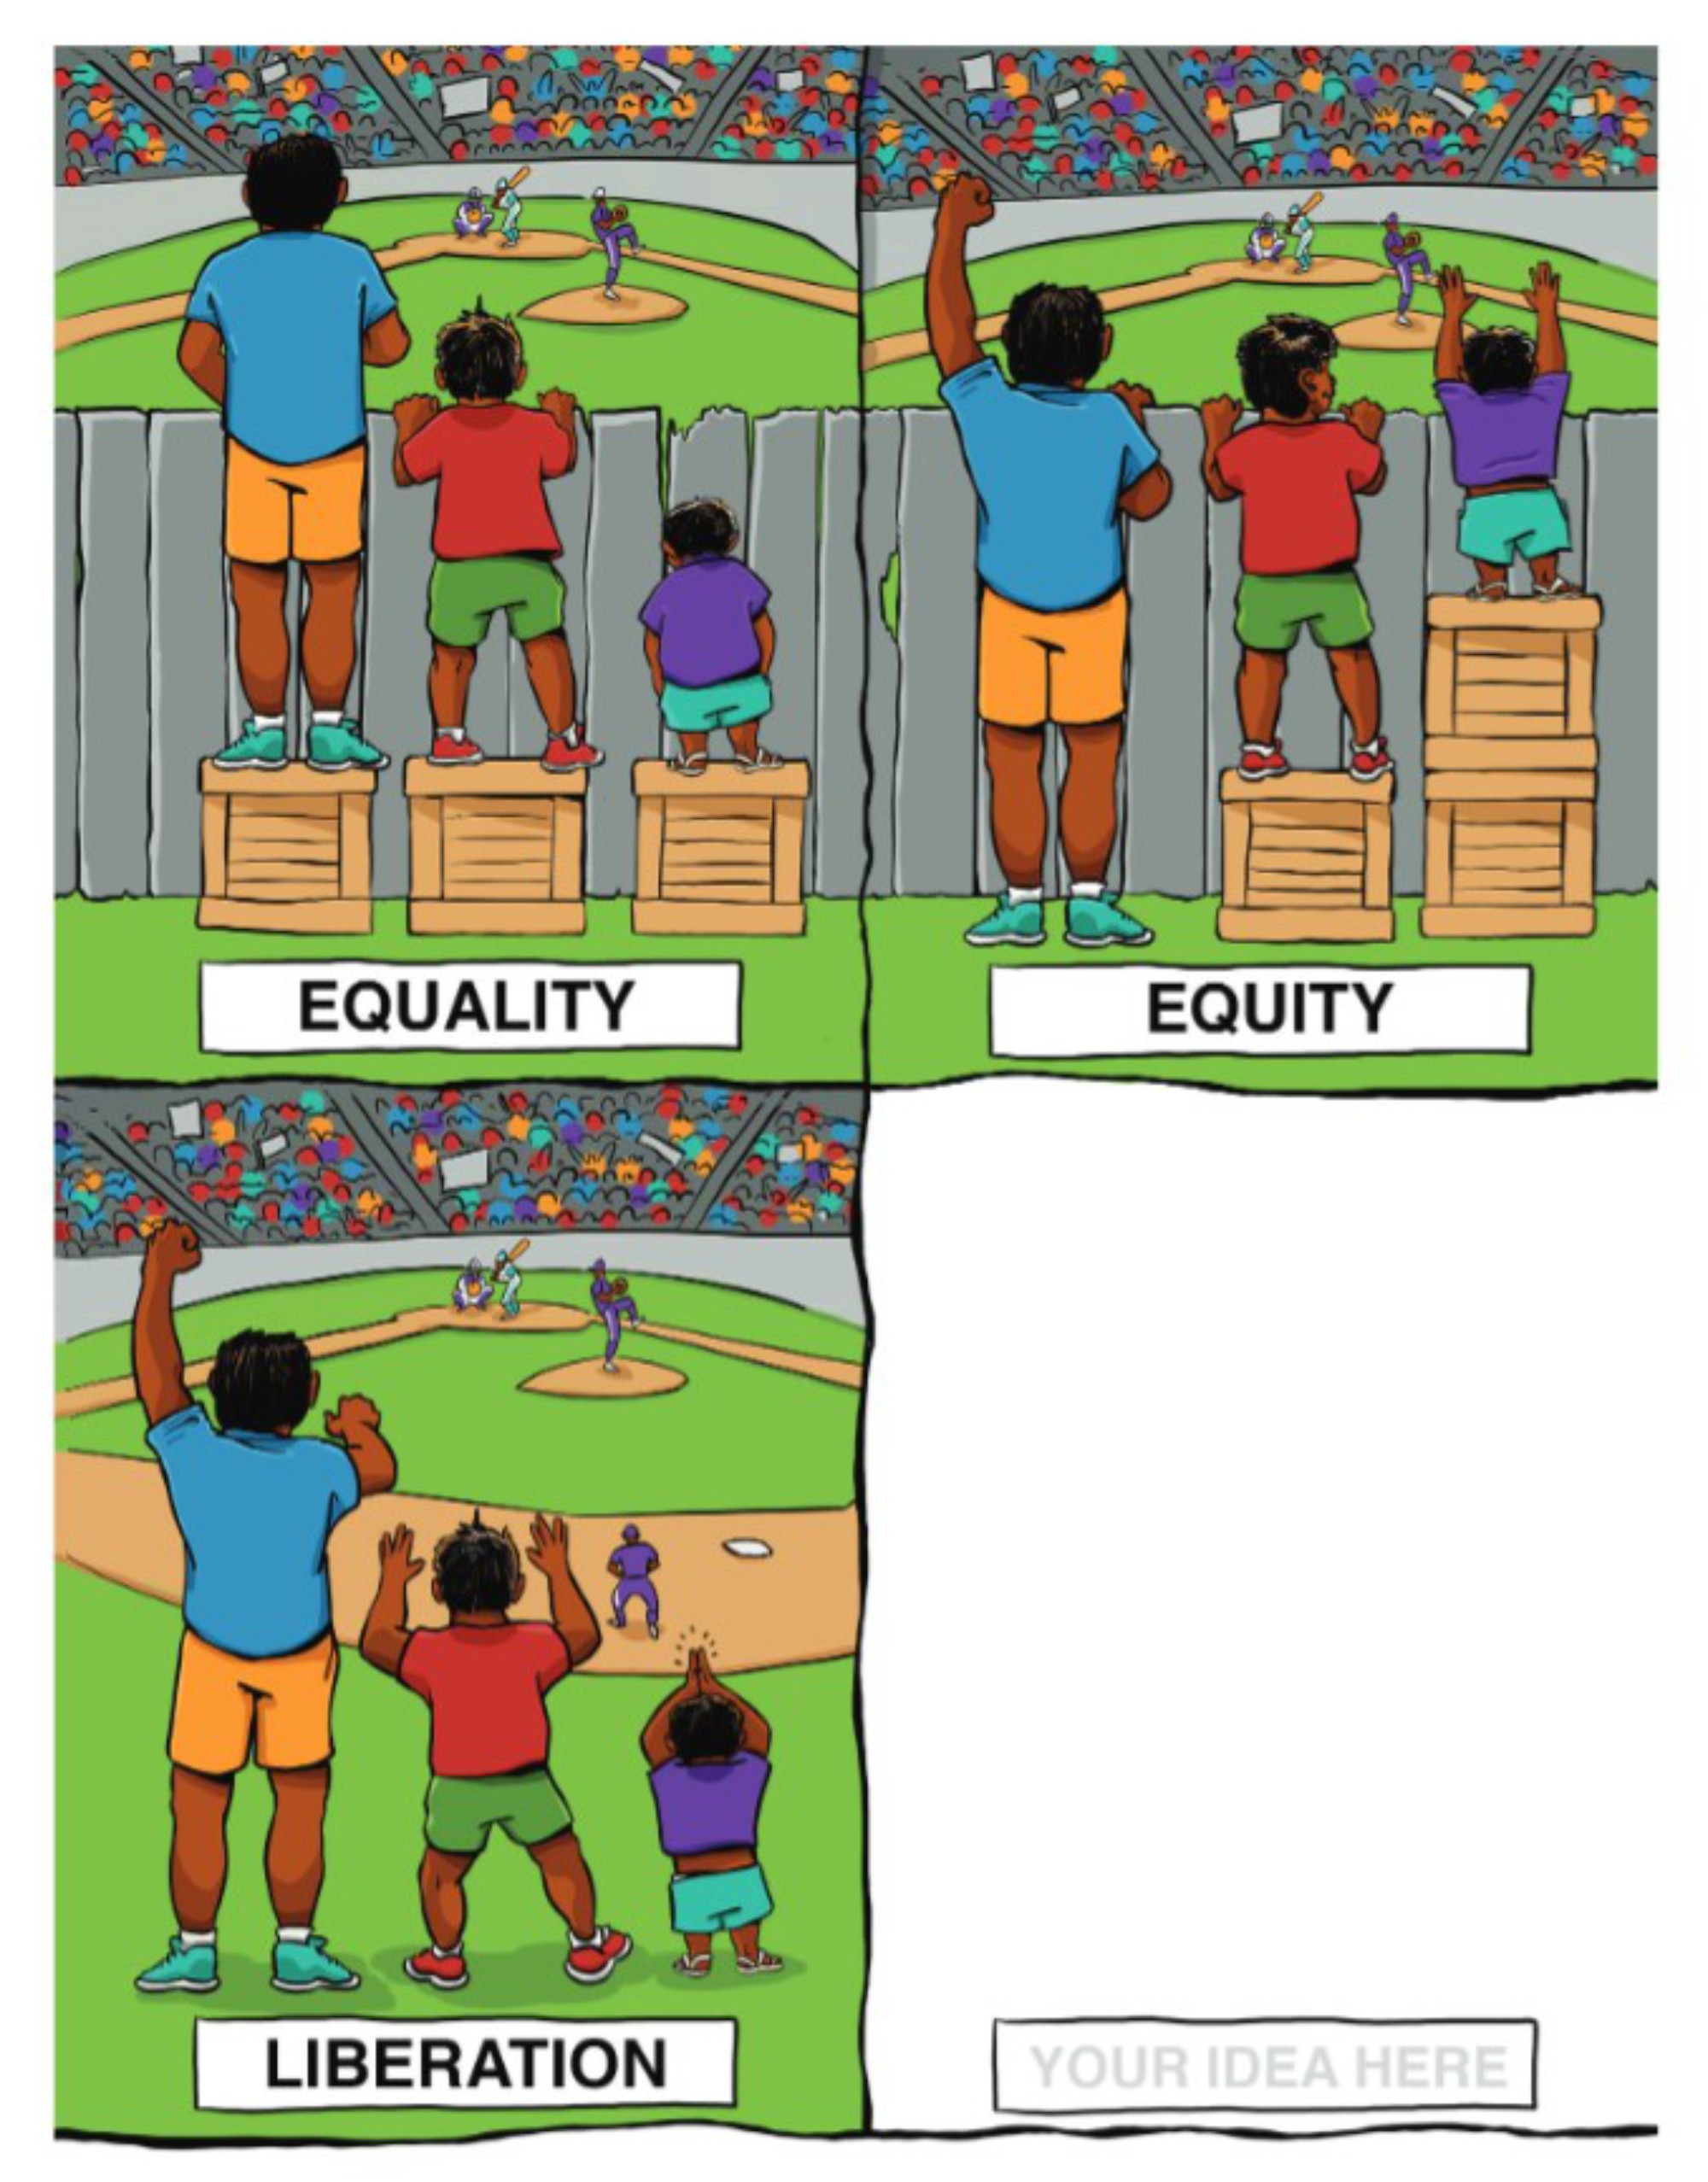 Illustration showing metaphors for equality (three people of different heights trying to watch a ball game over a fence, standing on identical boxes) equity (with the same three people standing on different height boxes so now all of them can see), and liberation, where the fence is not present, so all the people can see. There is also a fourth, empty box.